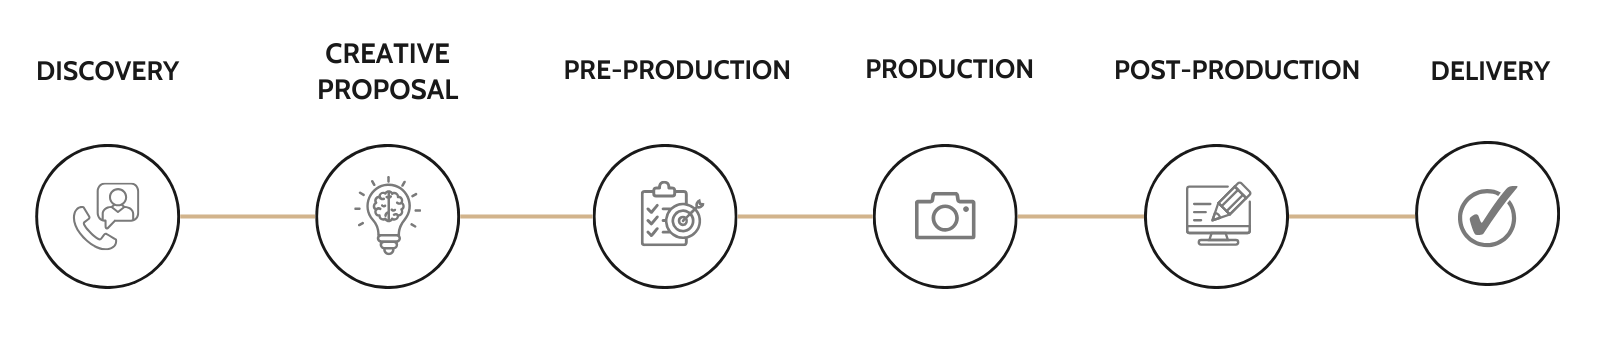 Product photography process timeline